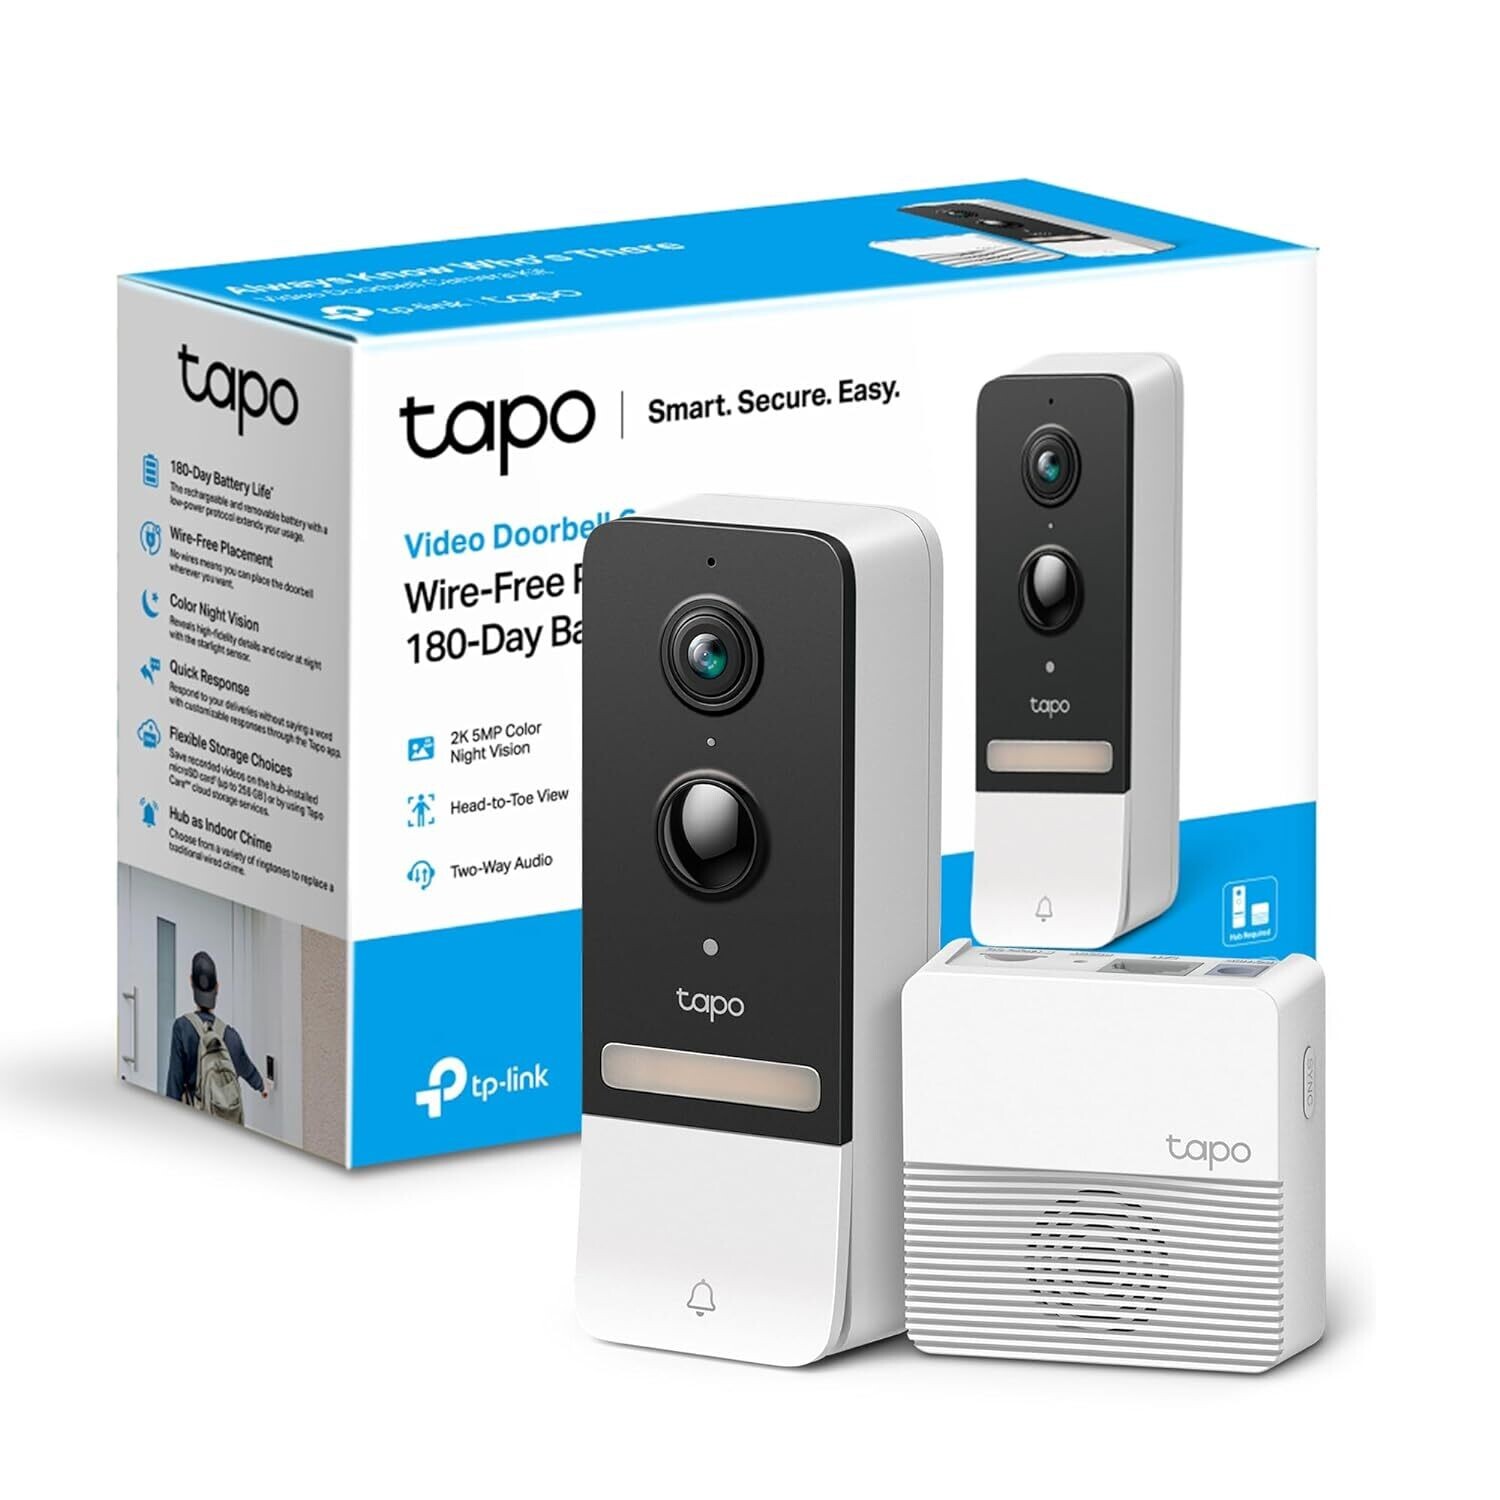 TP-Link Tapo D230S1 Smart Battery Video Doorbell with 2K Camera